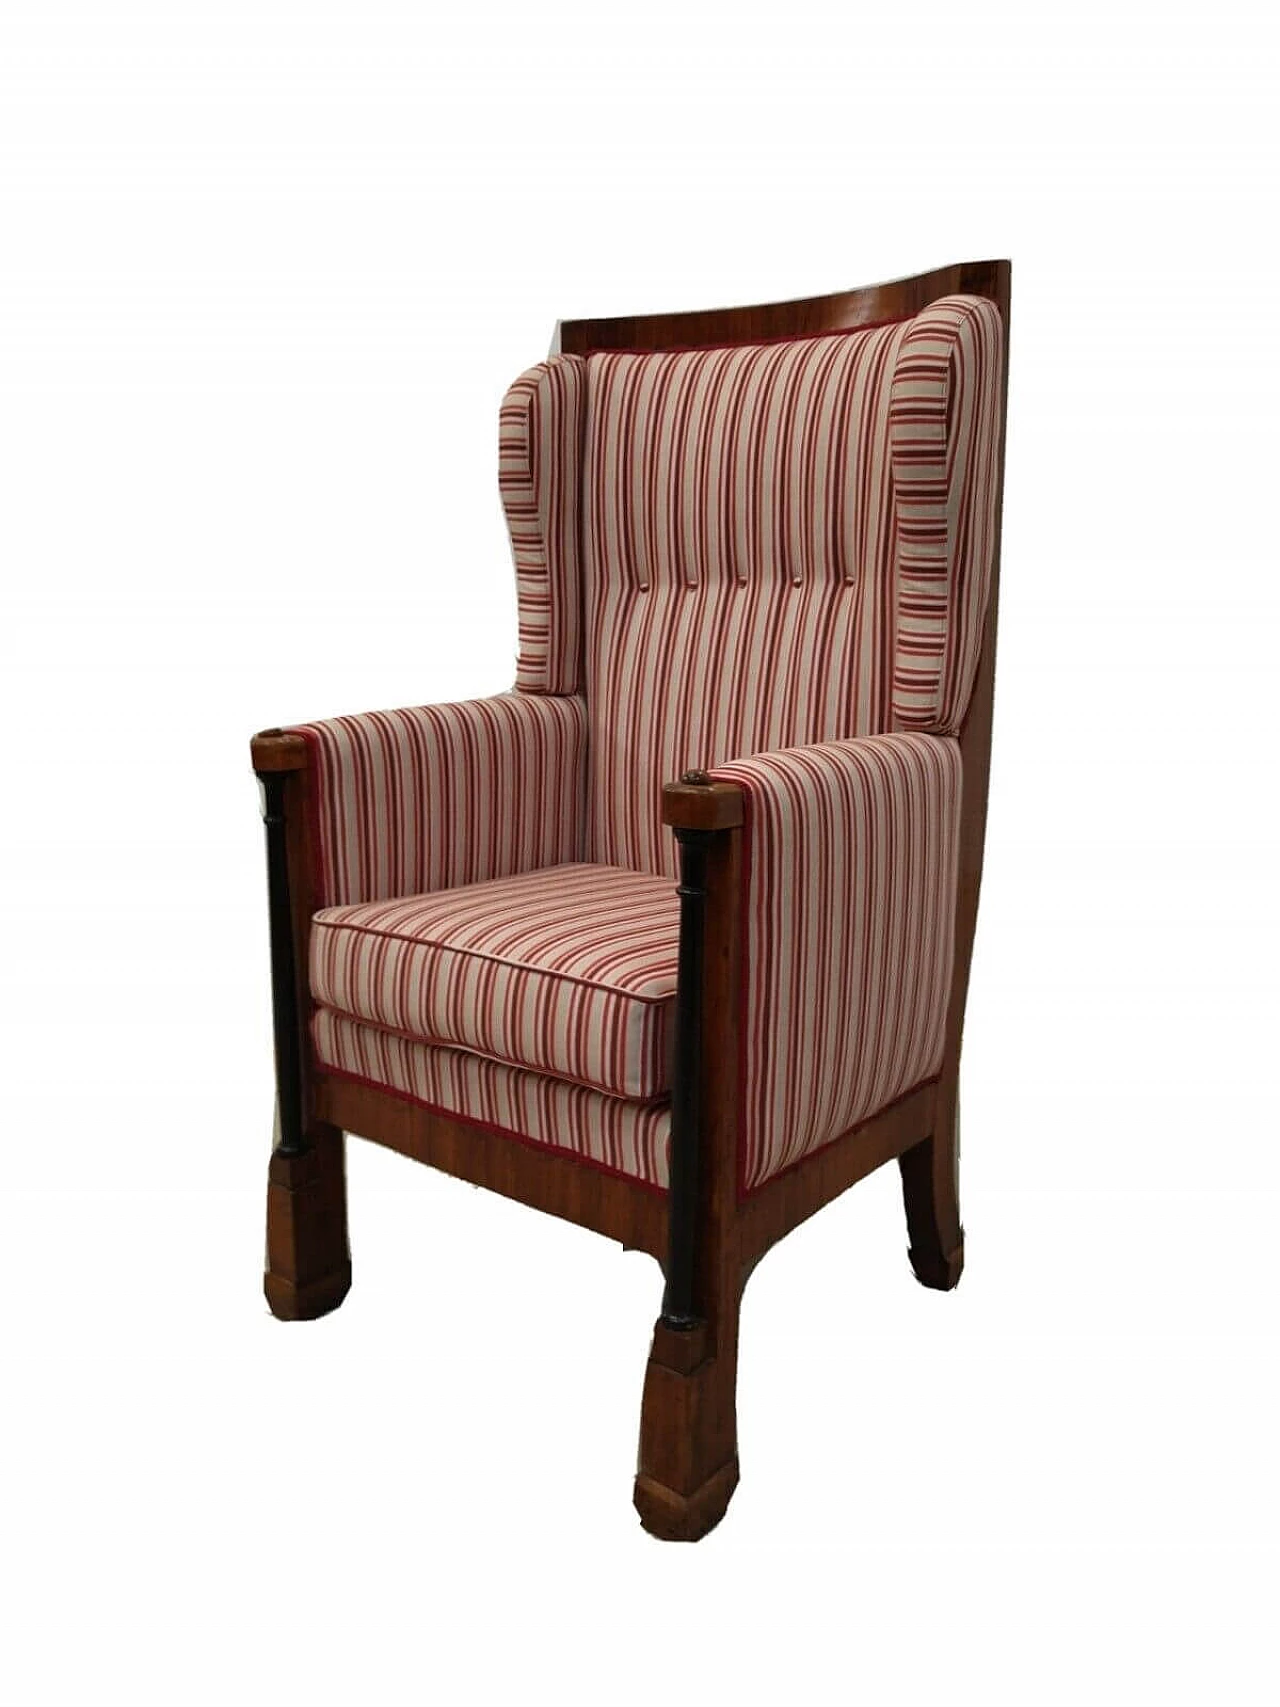 Empire armchair in walnut and fabric, 19th century 12